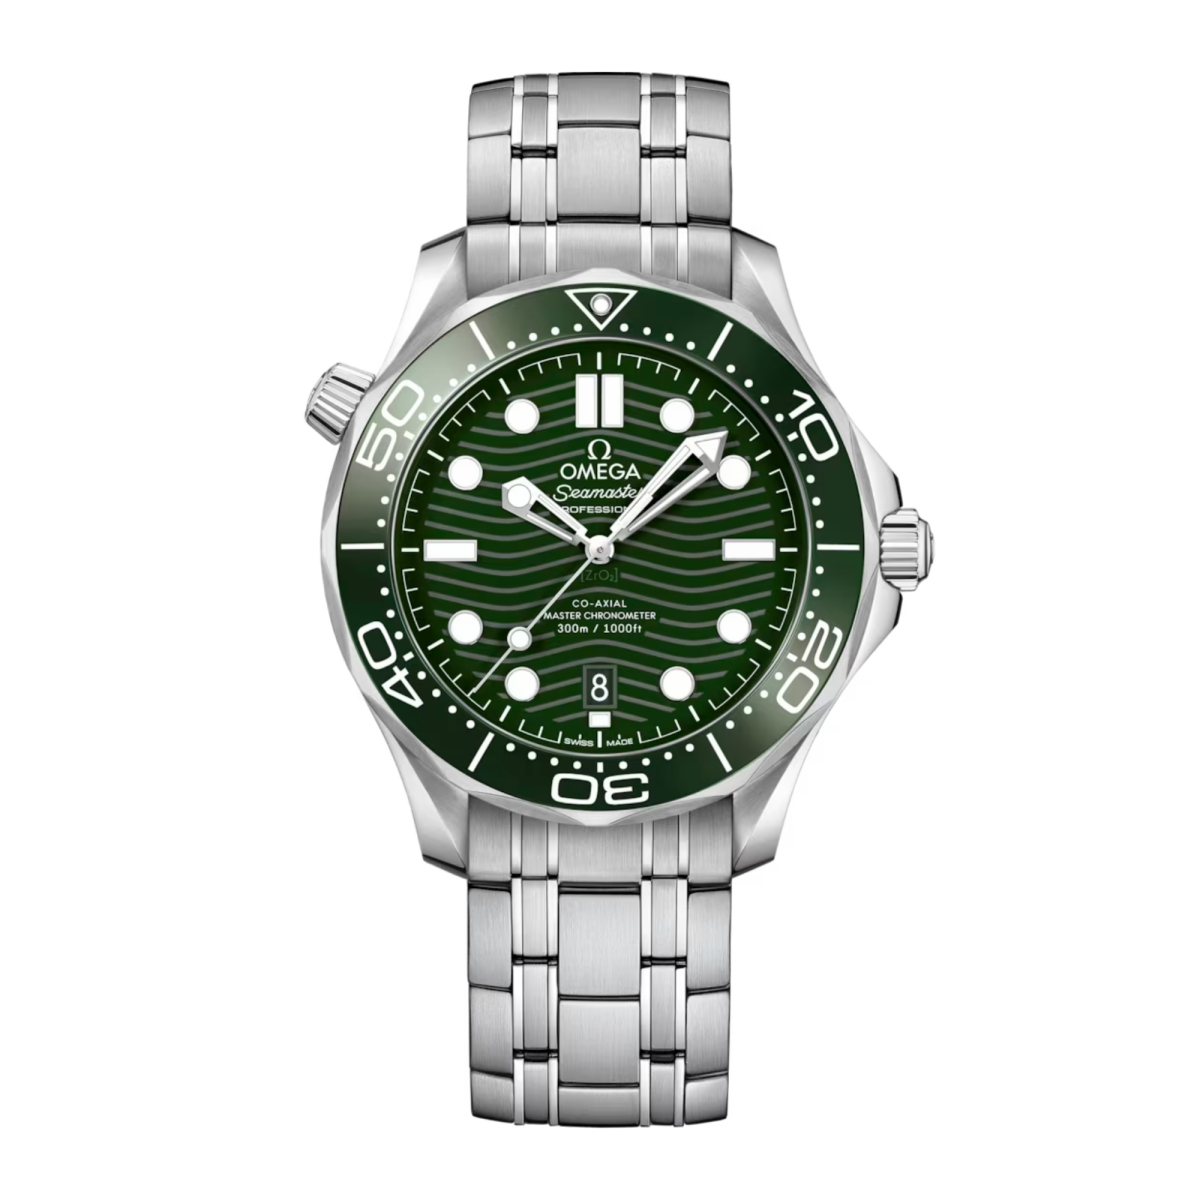 Seamaster Diver 300m Stainless Steel Green Dial
